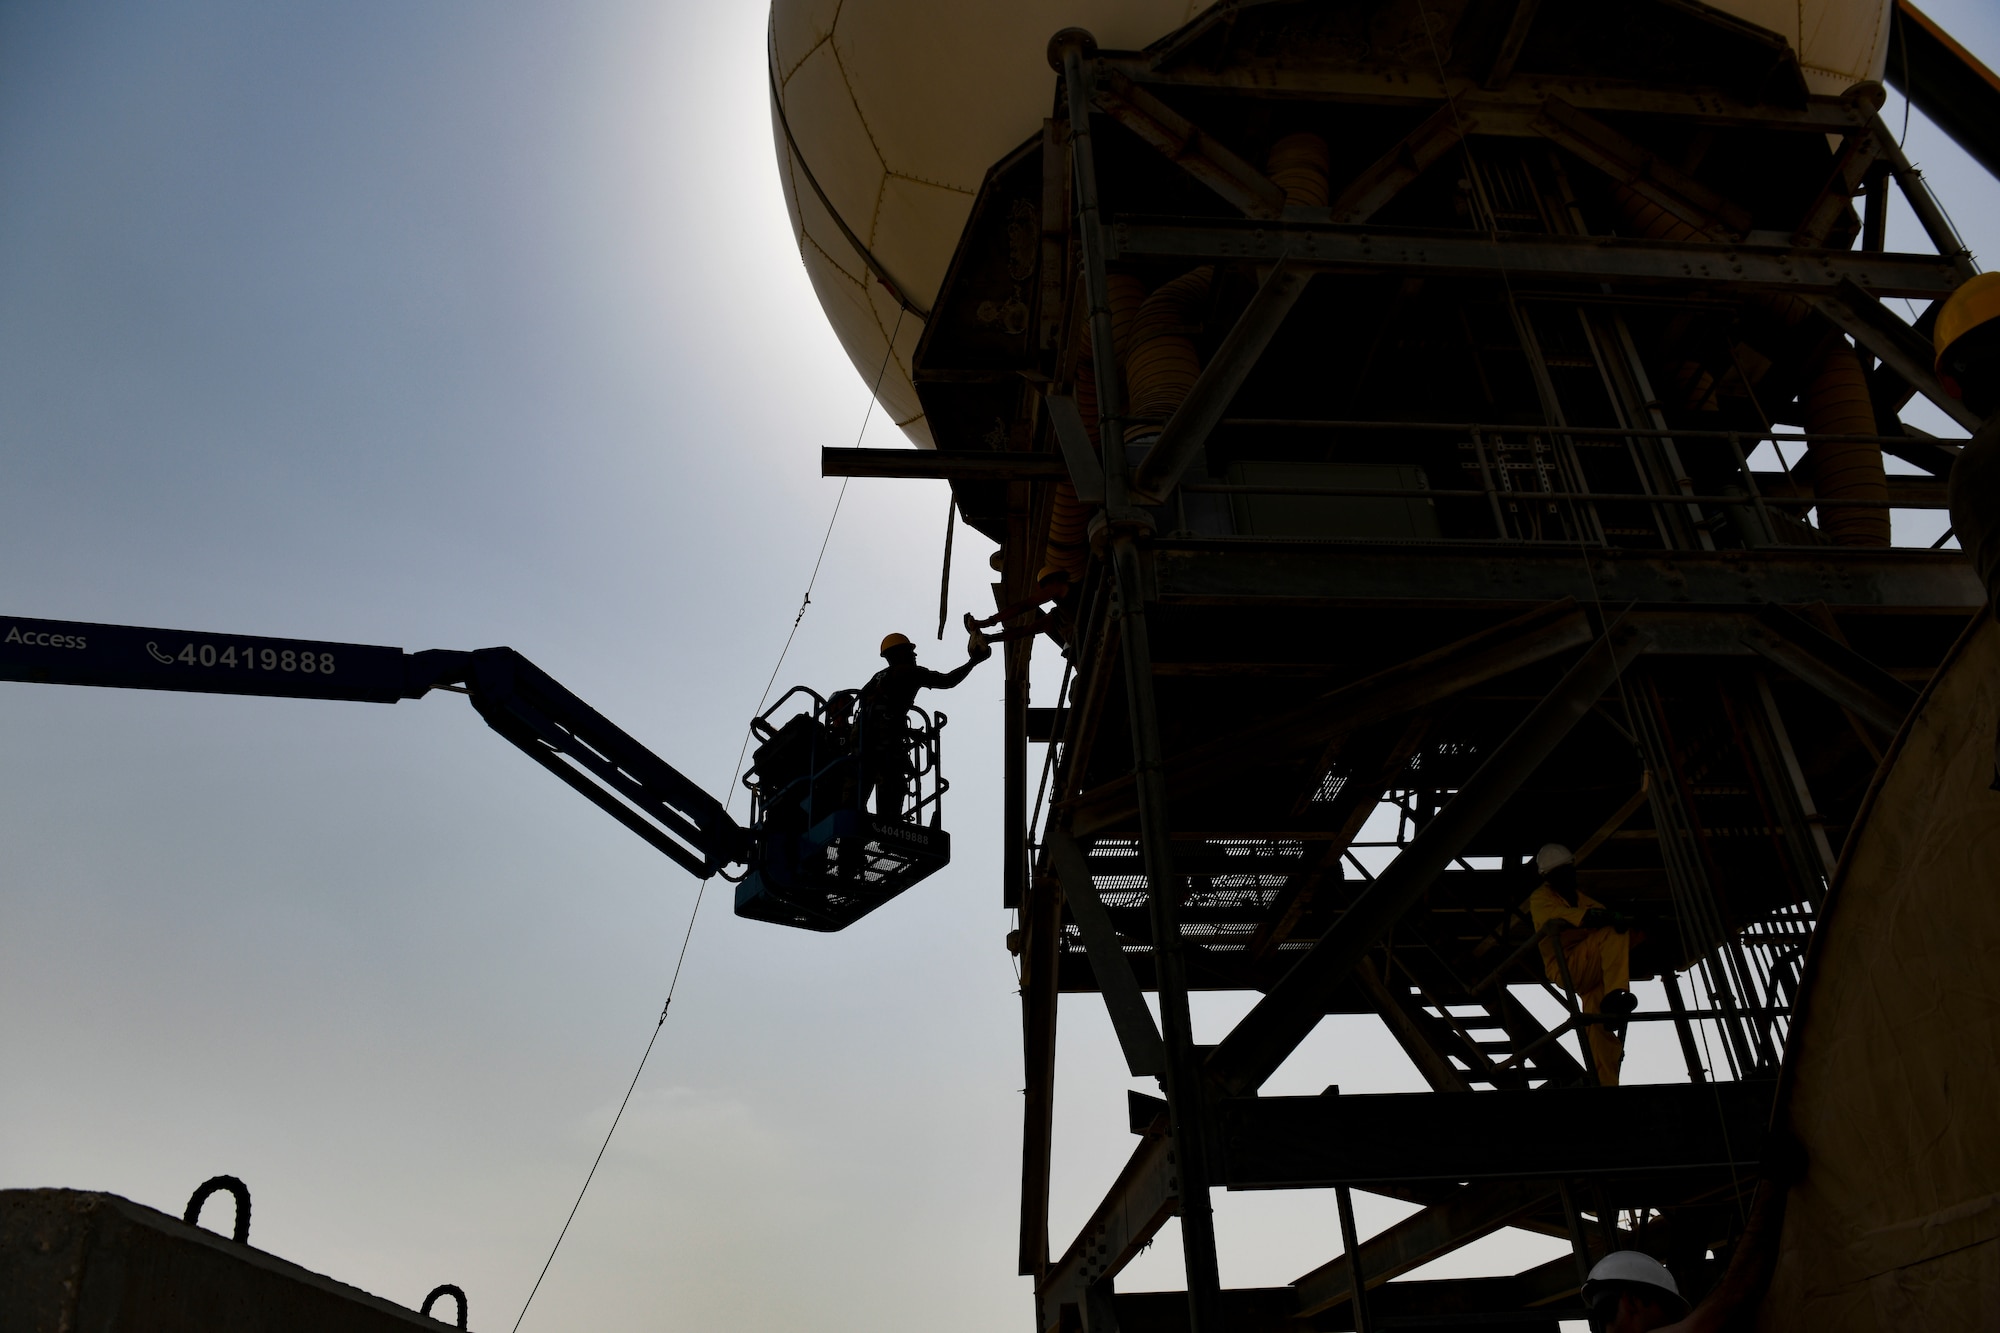 A U.S. Air Force Airman from the 727th Expeditionary Air Control Squadron, Detachment 3, reaches for tools while finishing the final touches on a radome covering for an AN/TPS-75 radar system after routine maintenance July 27, 2021, at Al Udeid Air Base, Qatar. The radome helps ensure longer life cycles for radar systems by providing protection from the elements. (U.S. Air Force by Staff Sgt. Alexandria Lee)